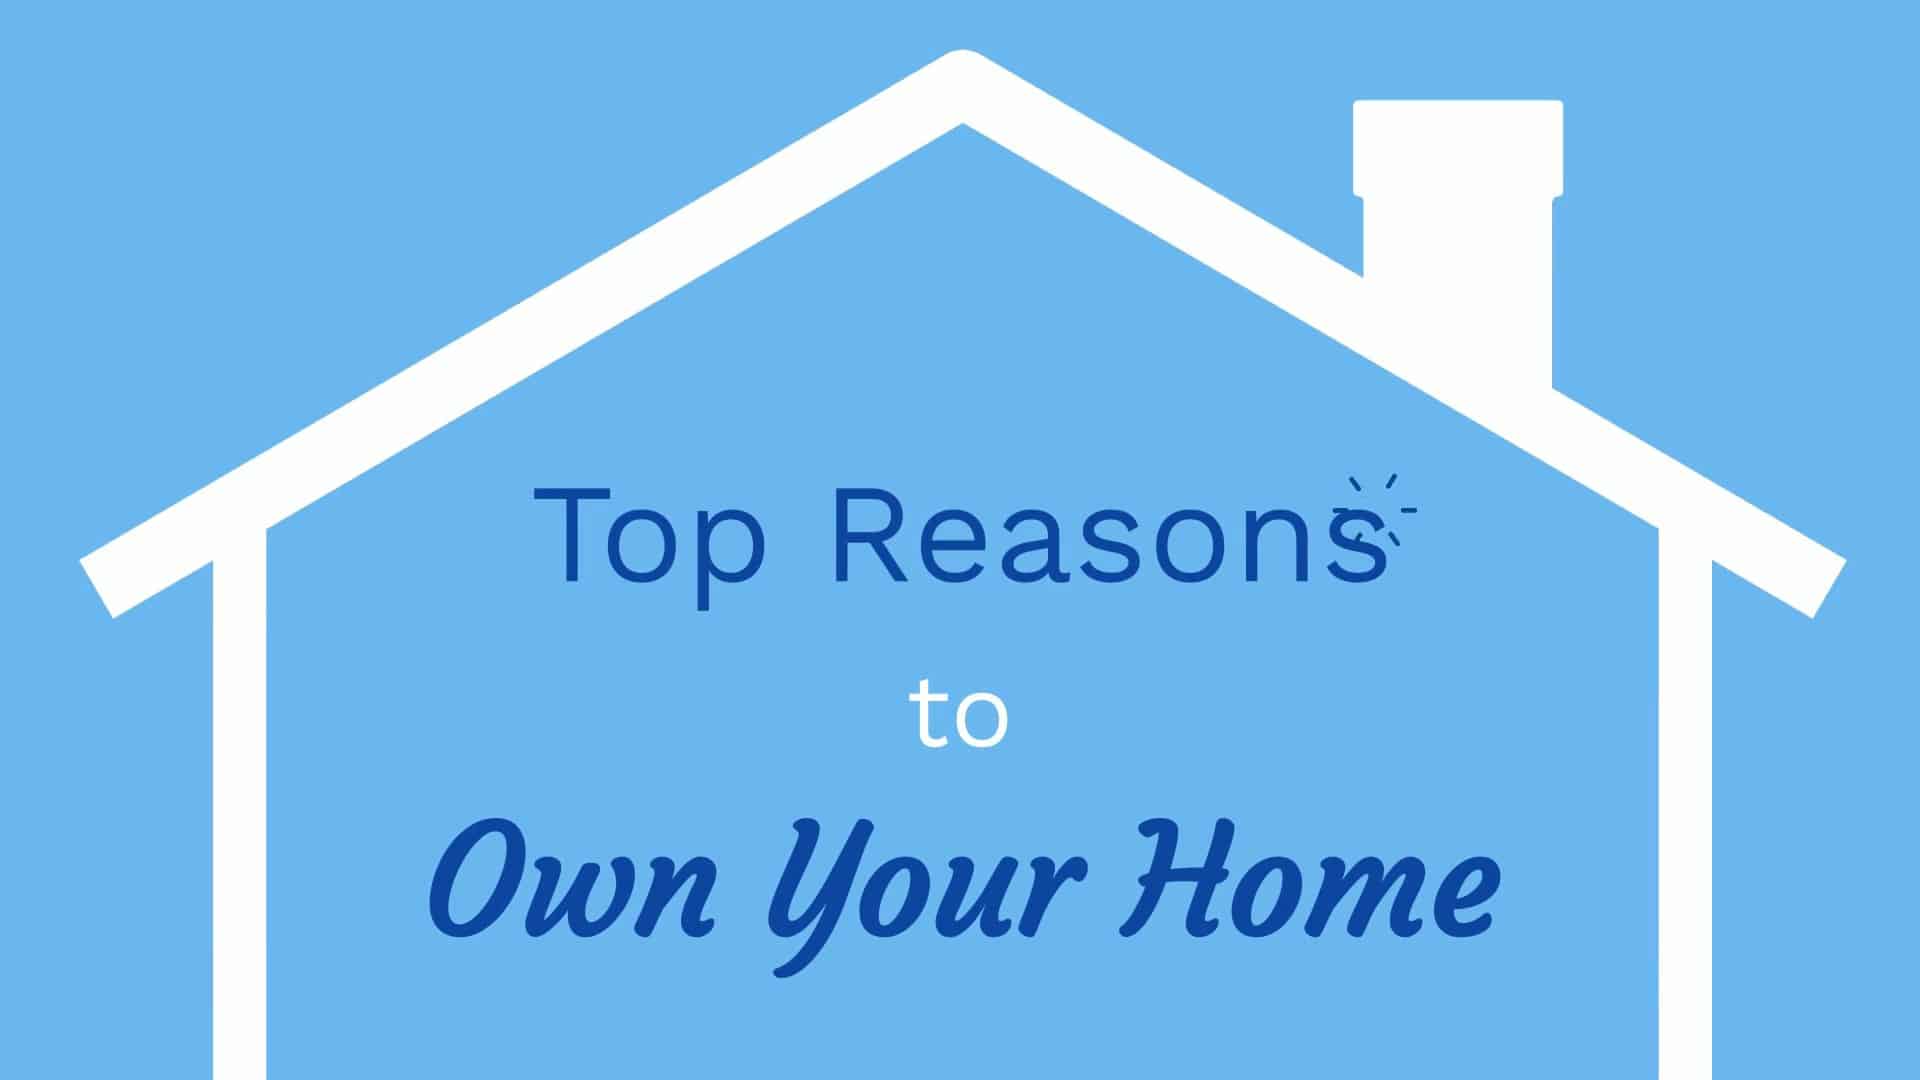 Top Reasons to Own Your Home